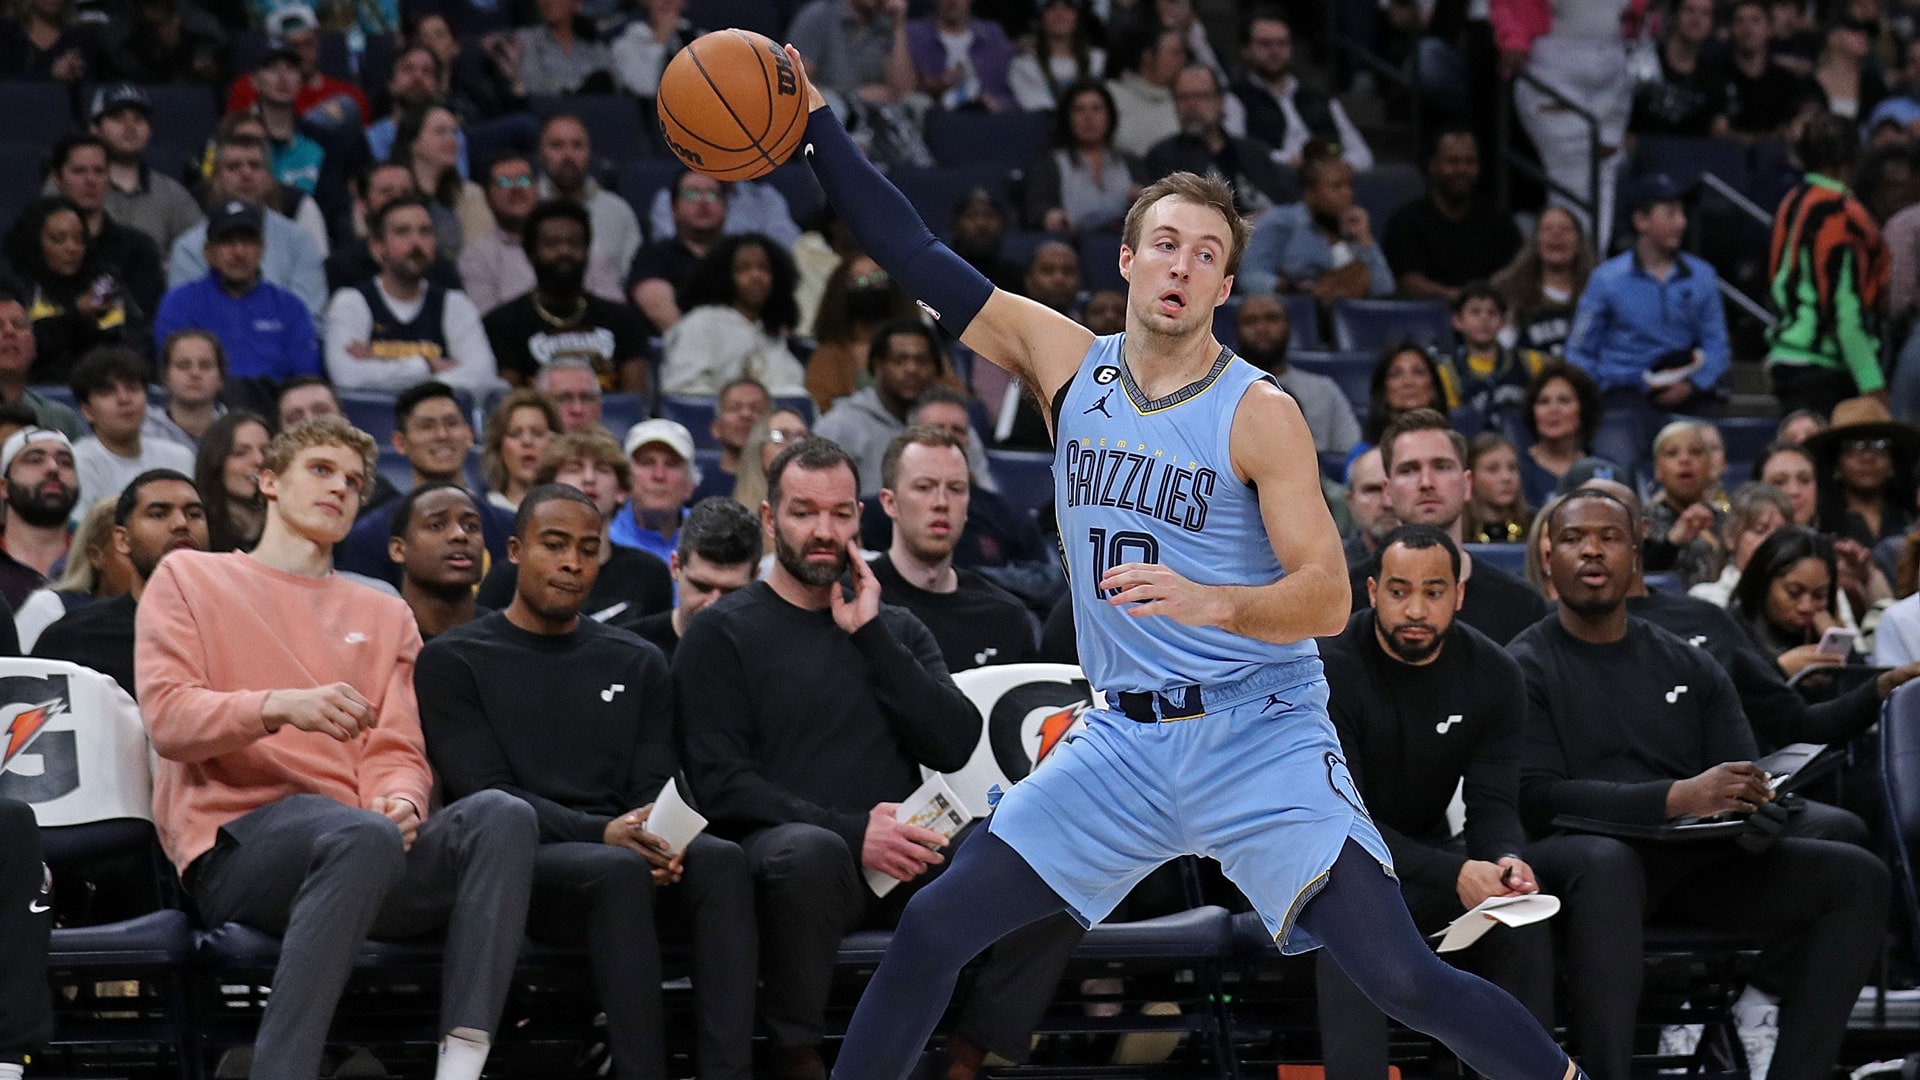 MEMPHIS, TENNESSEE - FEBRUARY 15: Luke Kennard #10 of the Memphis Grizzlies handles the ball during the game against the Utah Jazz at FedExForum on February 15, 2023 in Memphis, Tennessee.